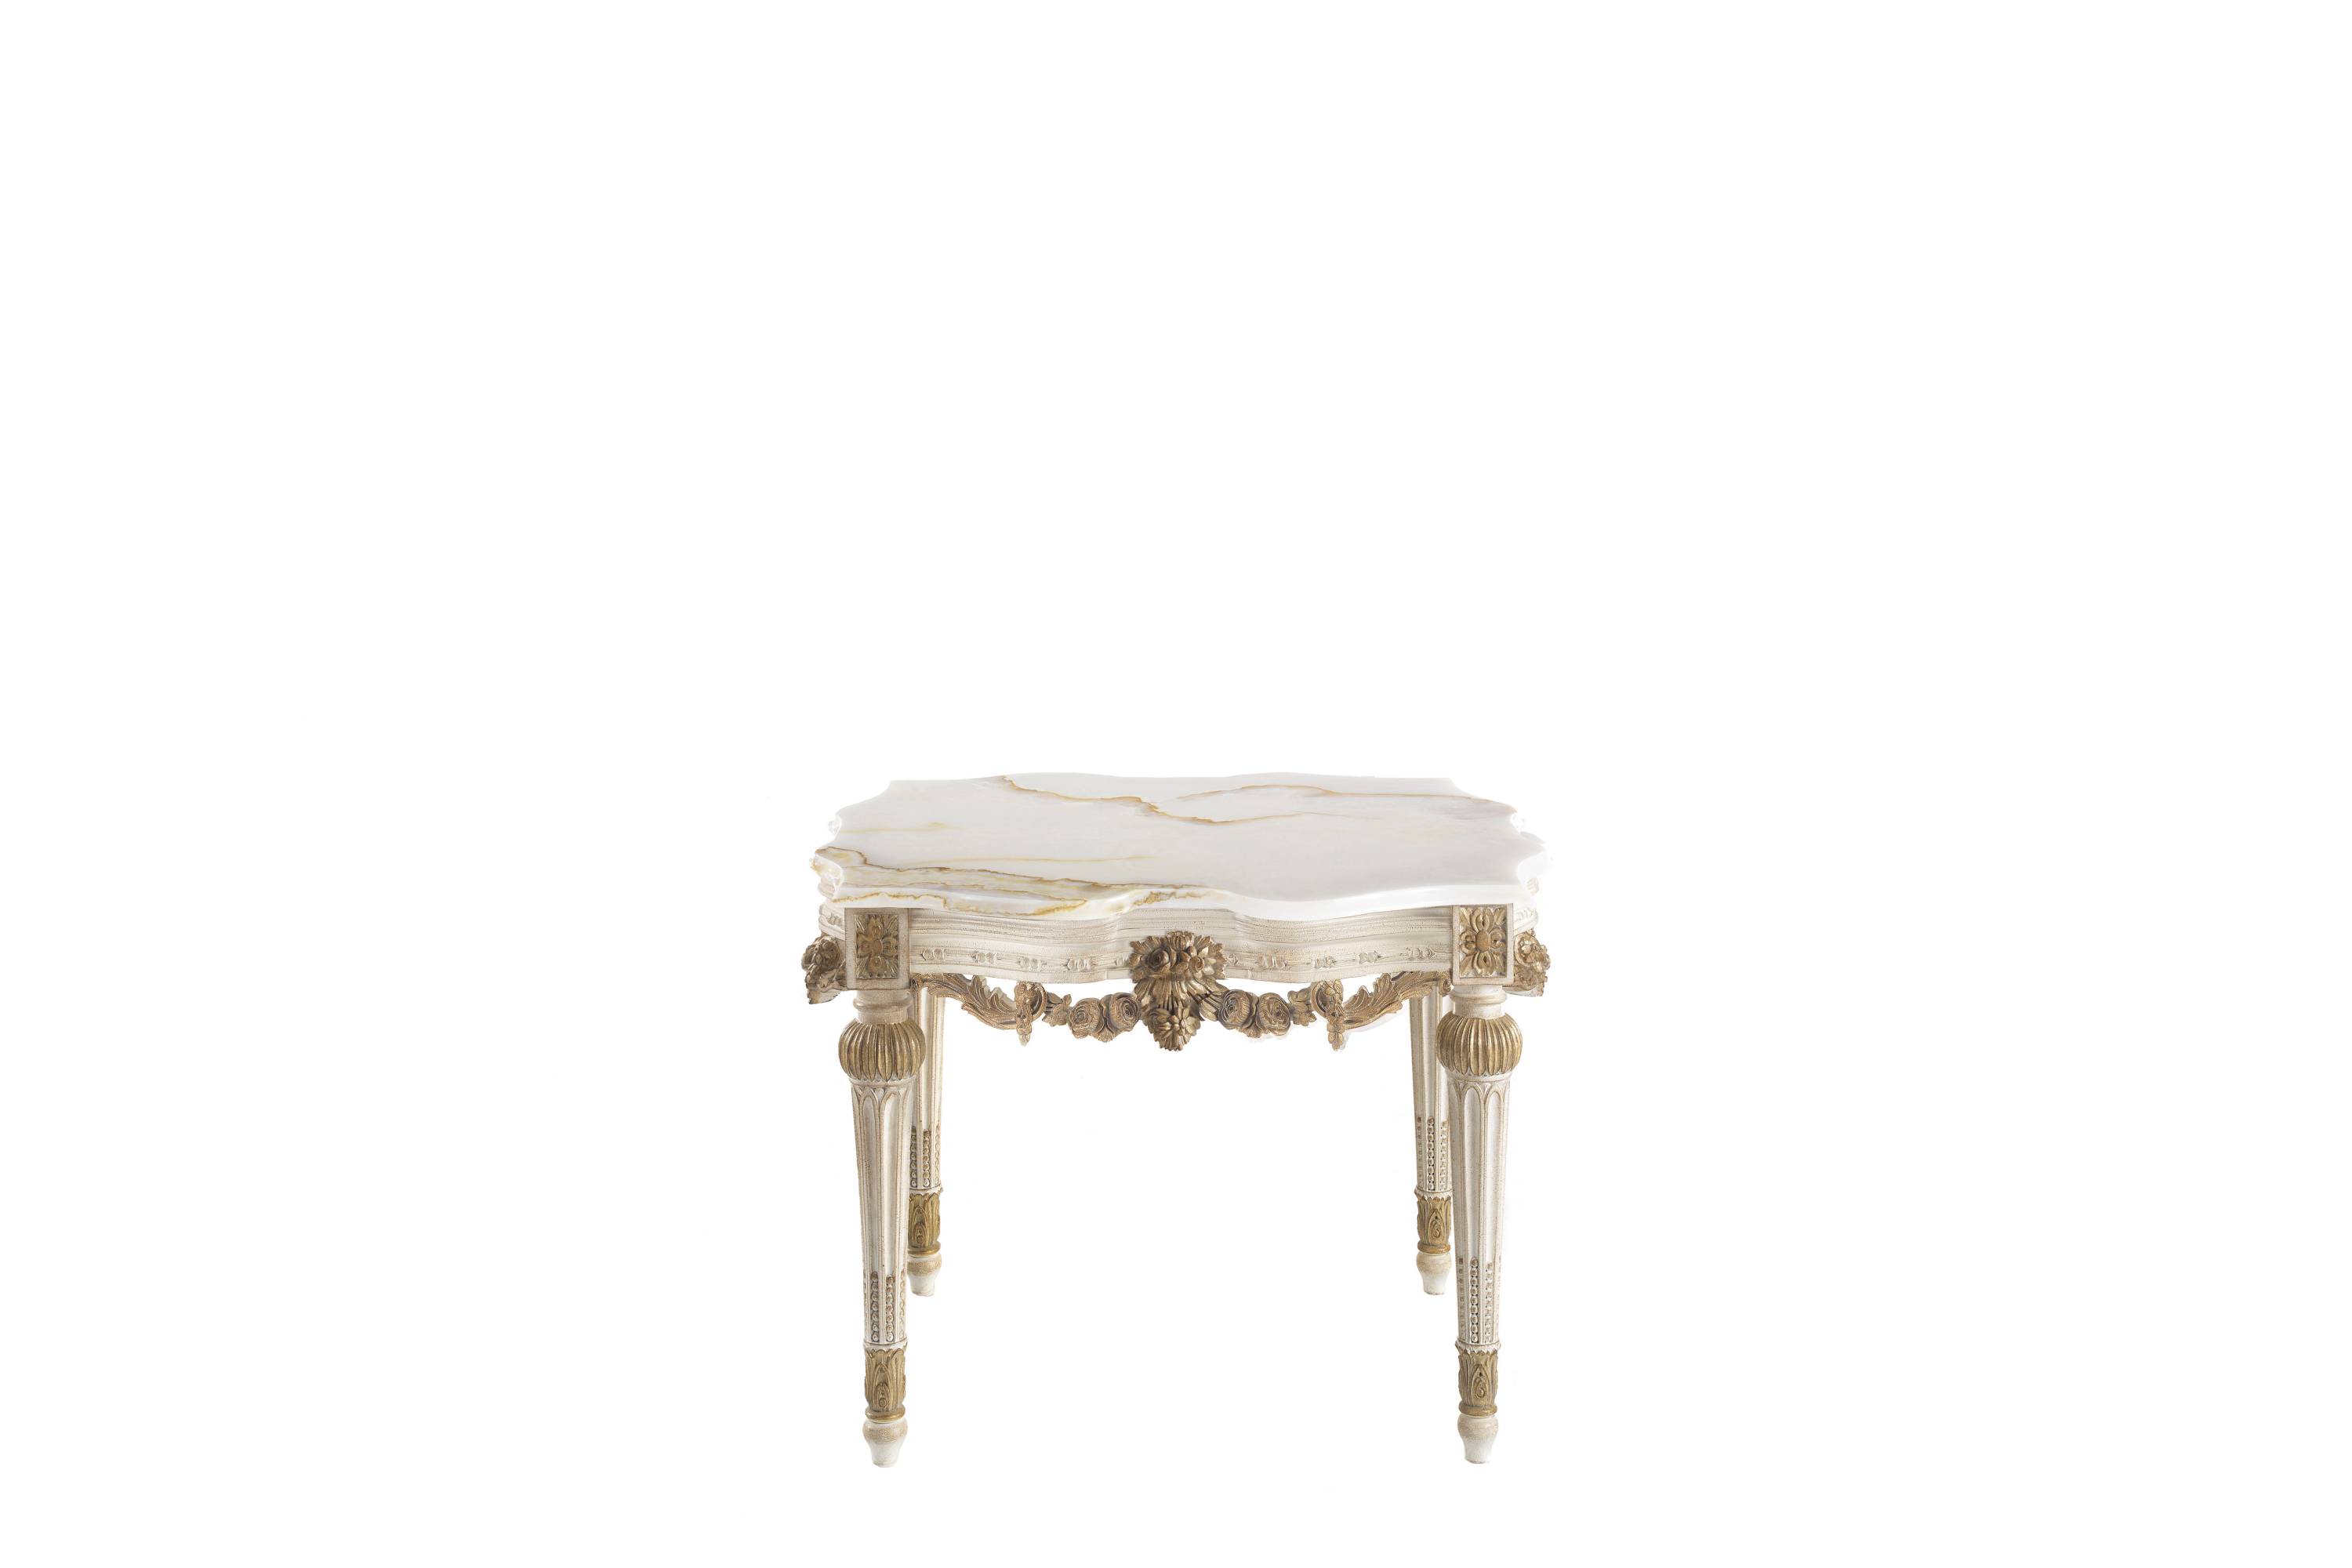 SCARLETT low table - Bespoke projects with luxury Made in Italy classic furniture